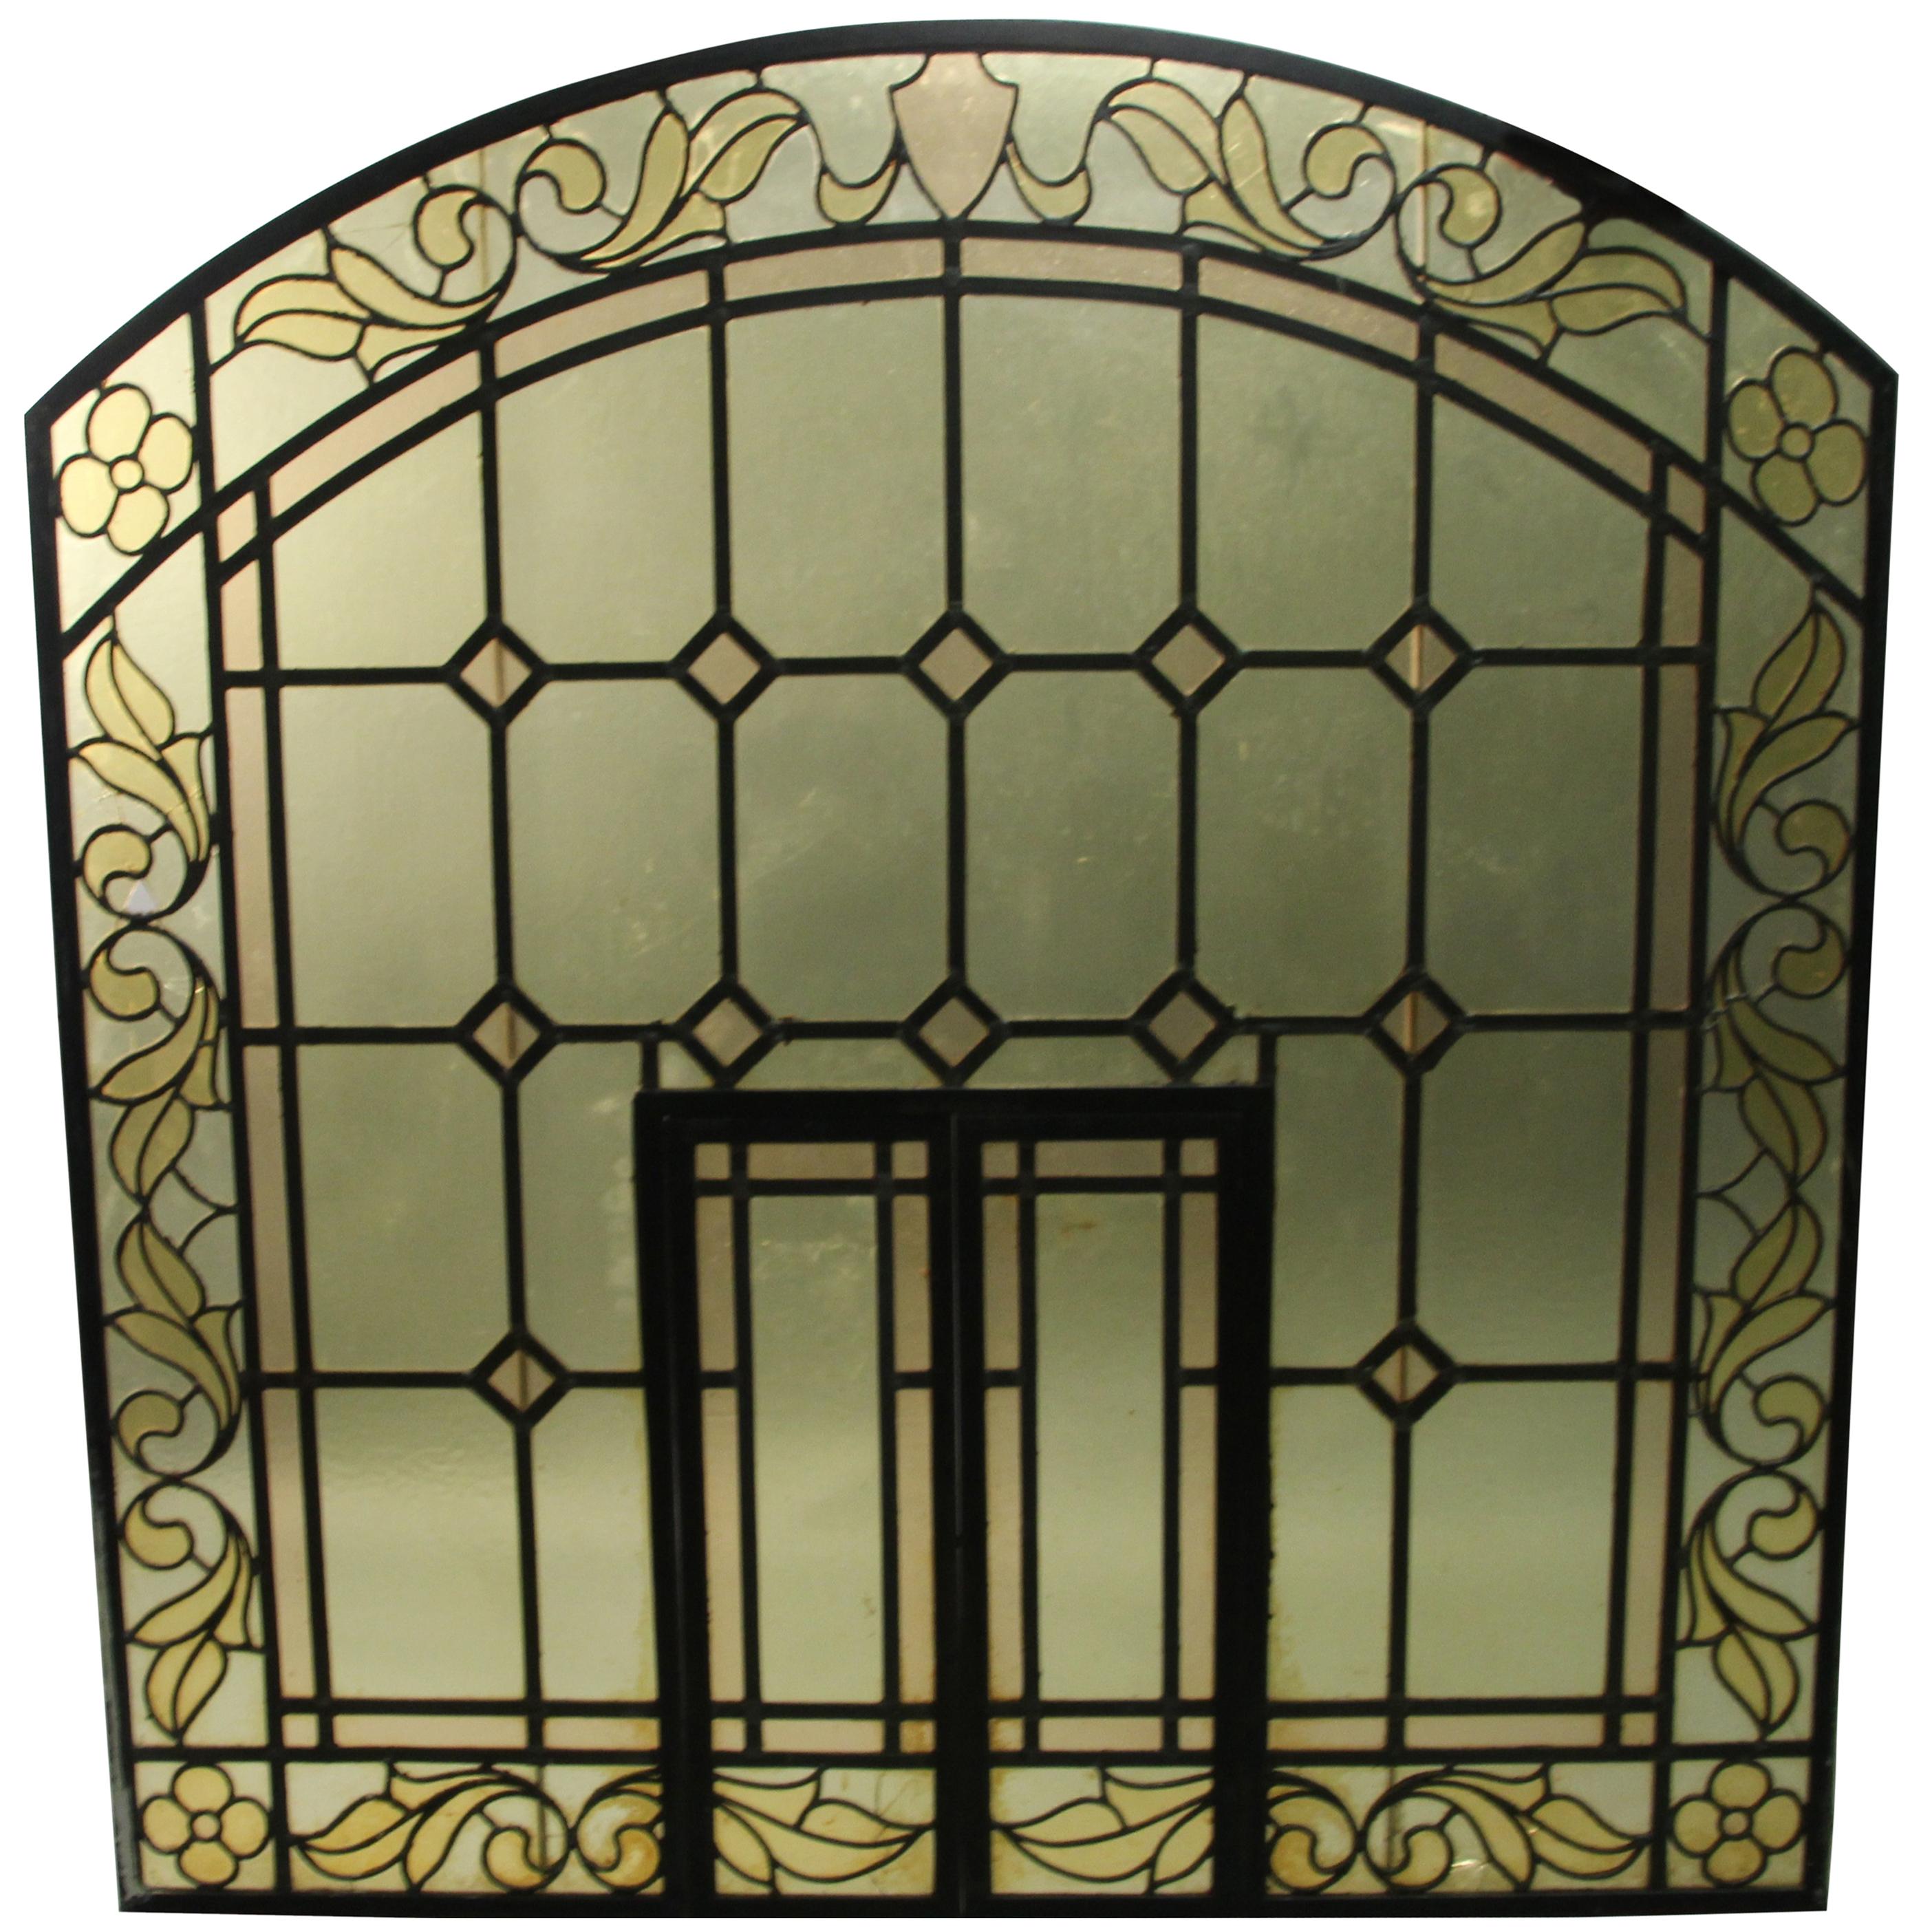 Arched 1920s Window with Moving Inside Panel